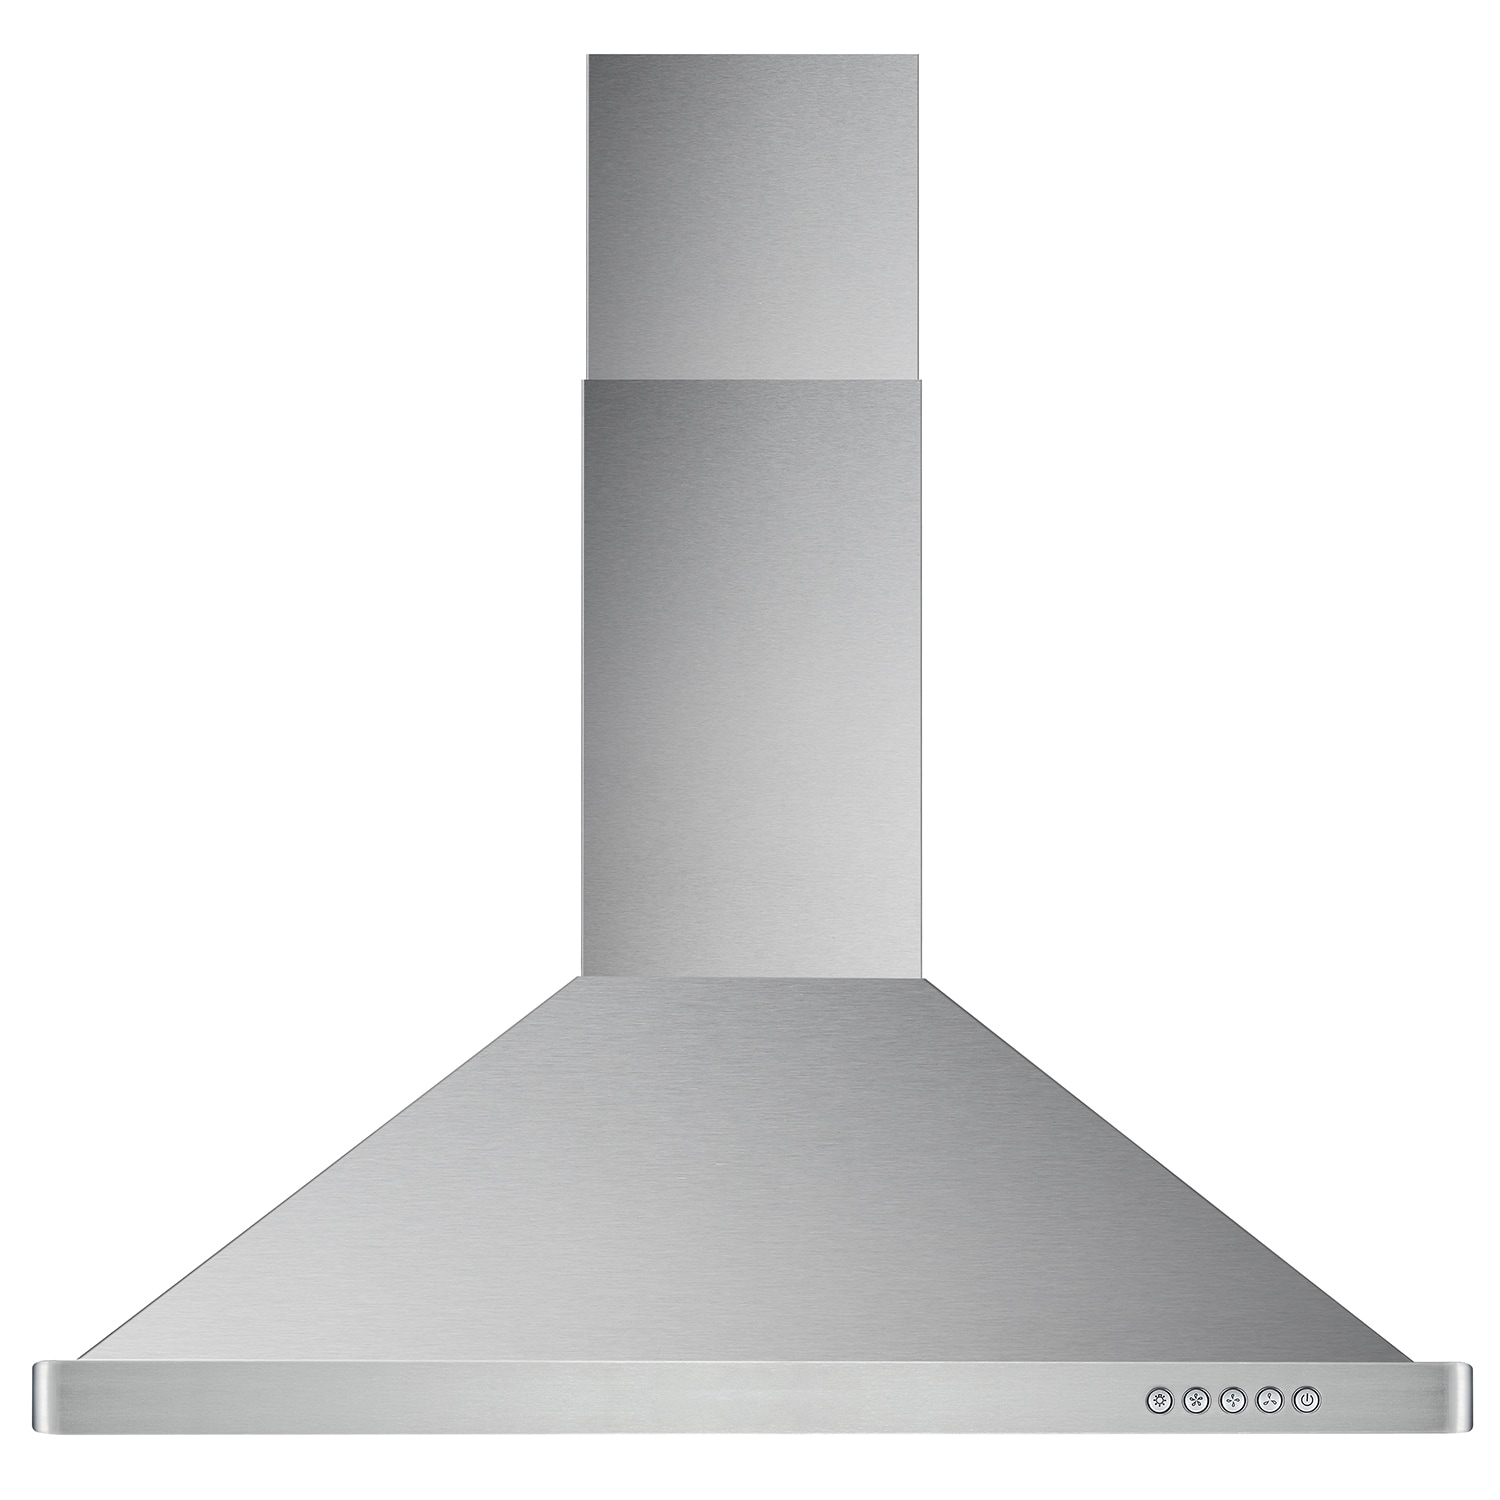 30 in. Ducted Wall Mount Range Hood in Stainless Steel, 380 CFM, Push  Buttons